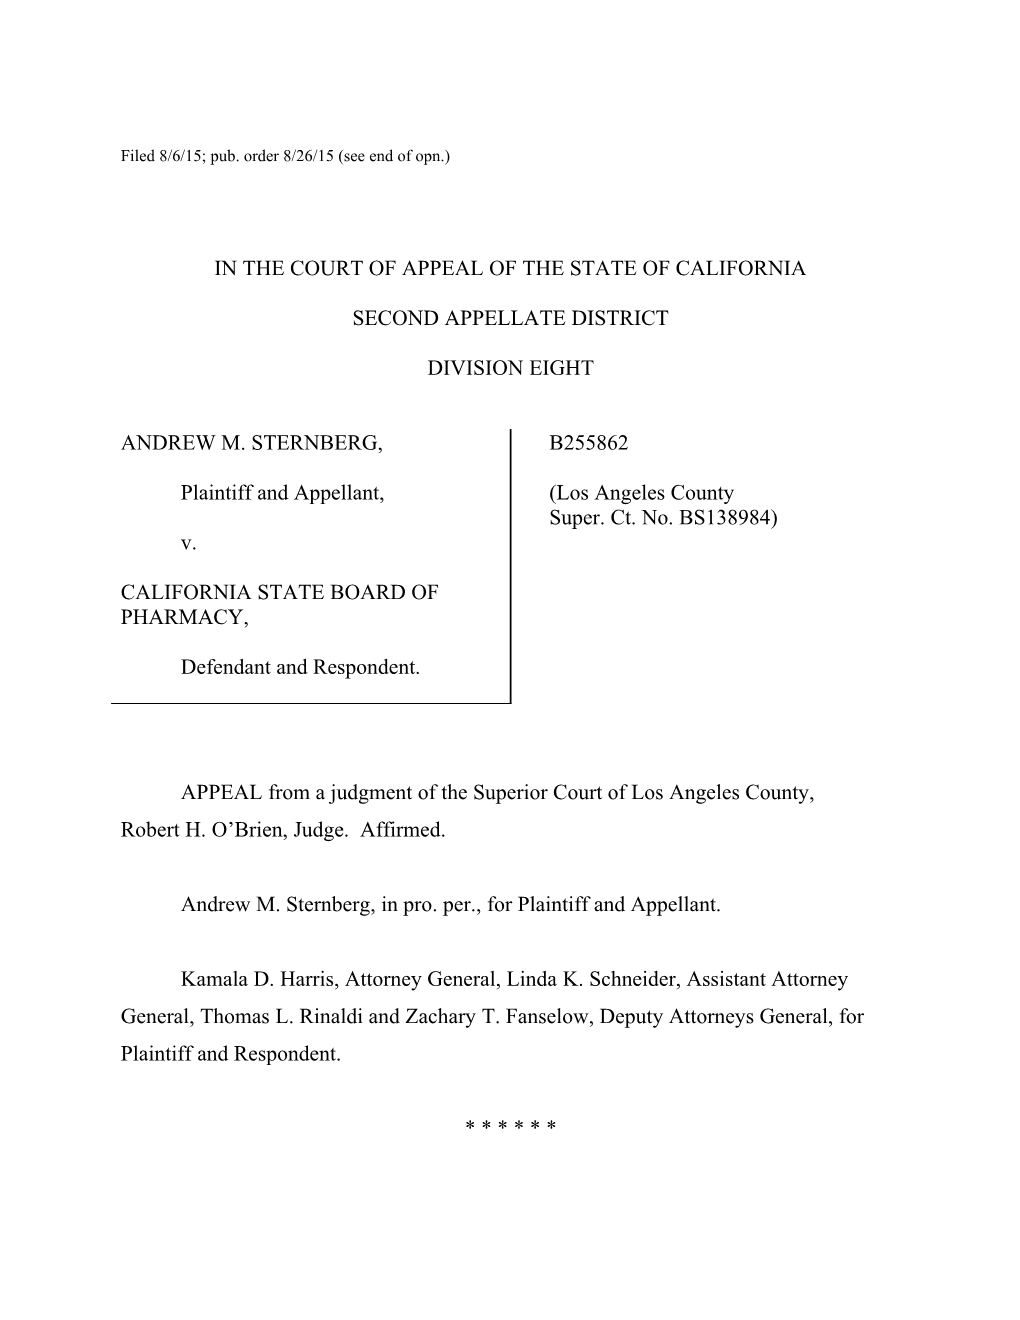 Filed 8/6/15; Pub. Order 8/26/15 (See End of Opn.)